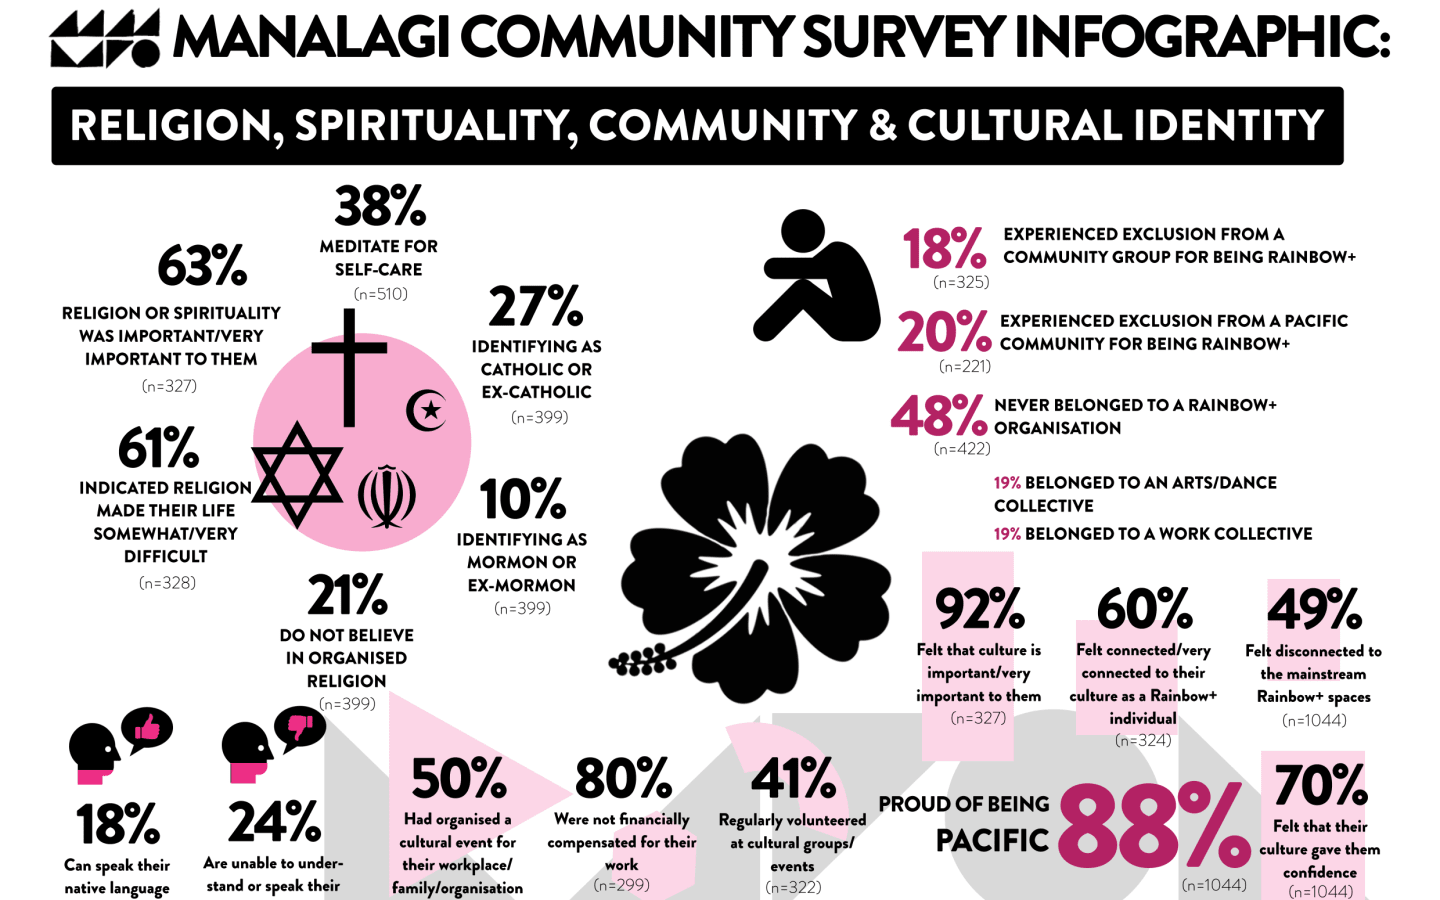 An infographic showing religion, spirituality, community and cultural identity.